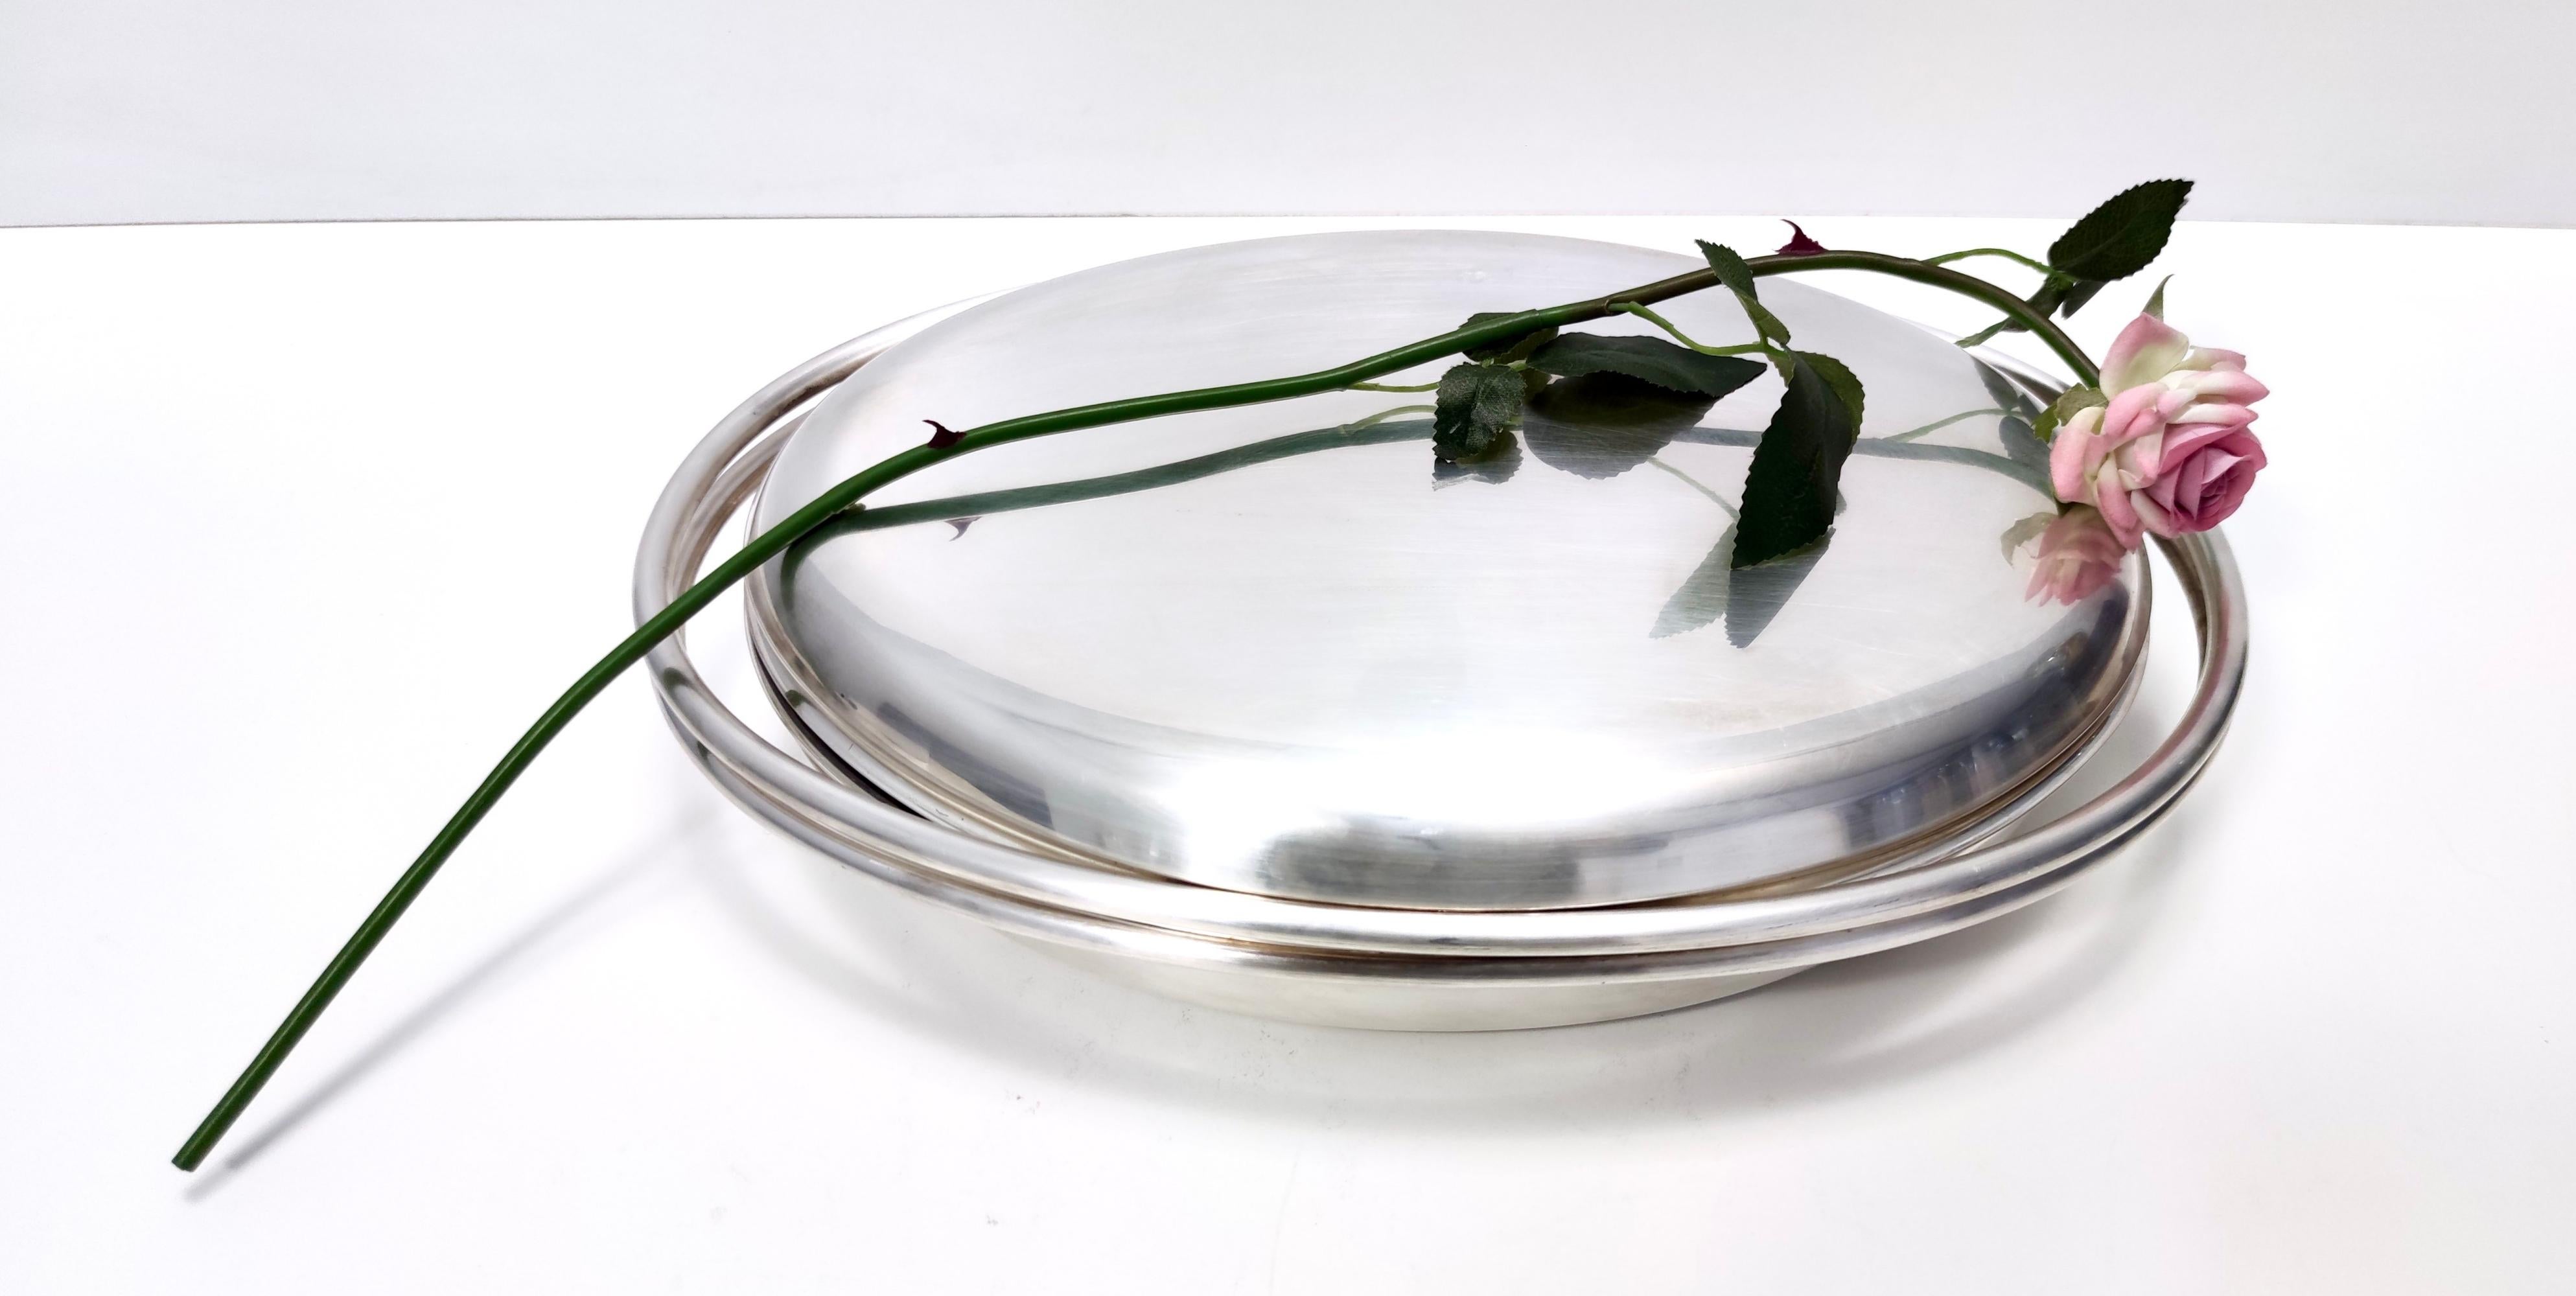 Made in Italy, 1970s - 1980s.
This is a great silver plated metal serving dish.
Its simple design was created by Lino Sabattini. 
This is a vintage piece, therefore it might show slight traces of use such as its original patina, but overall it can